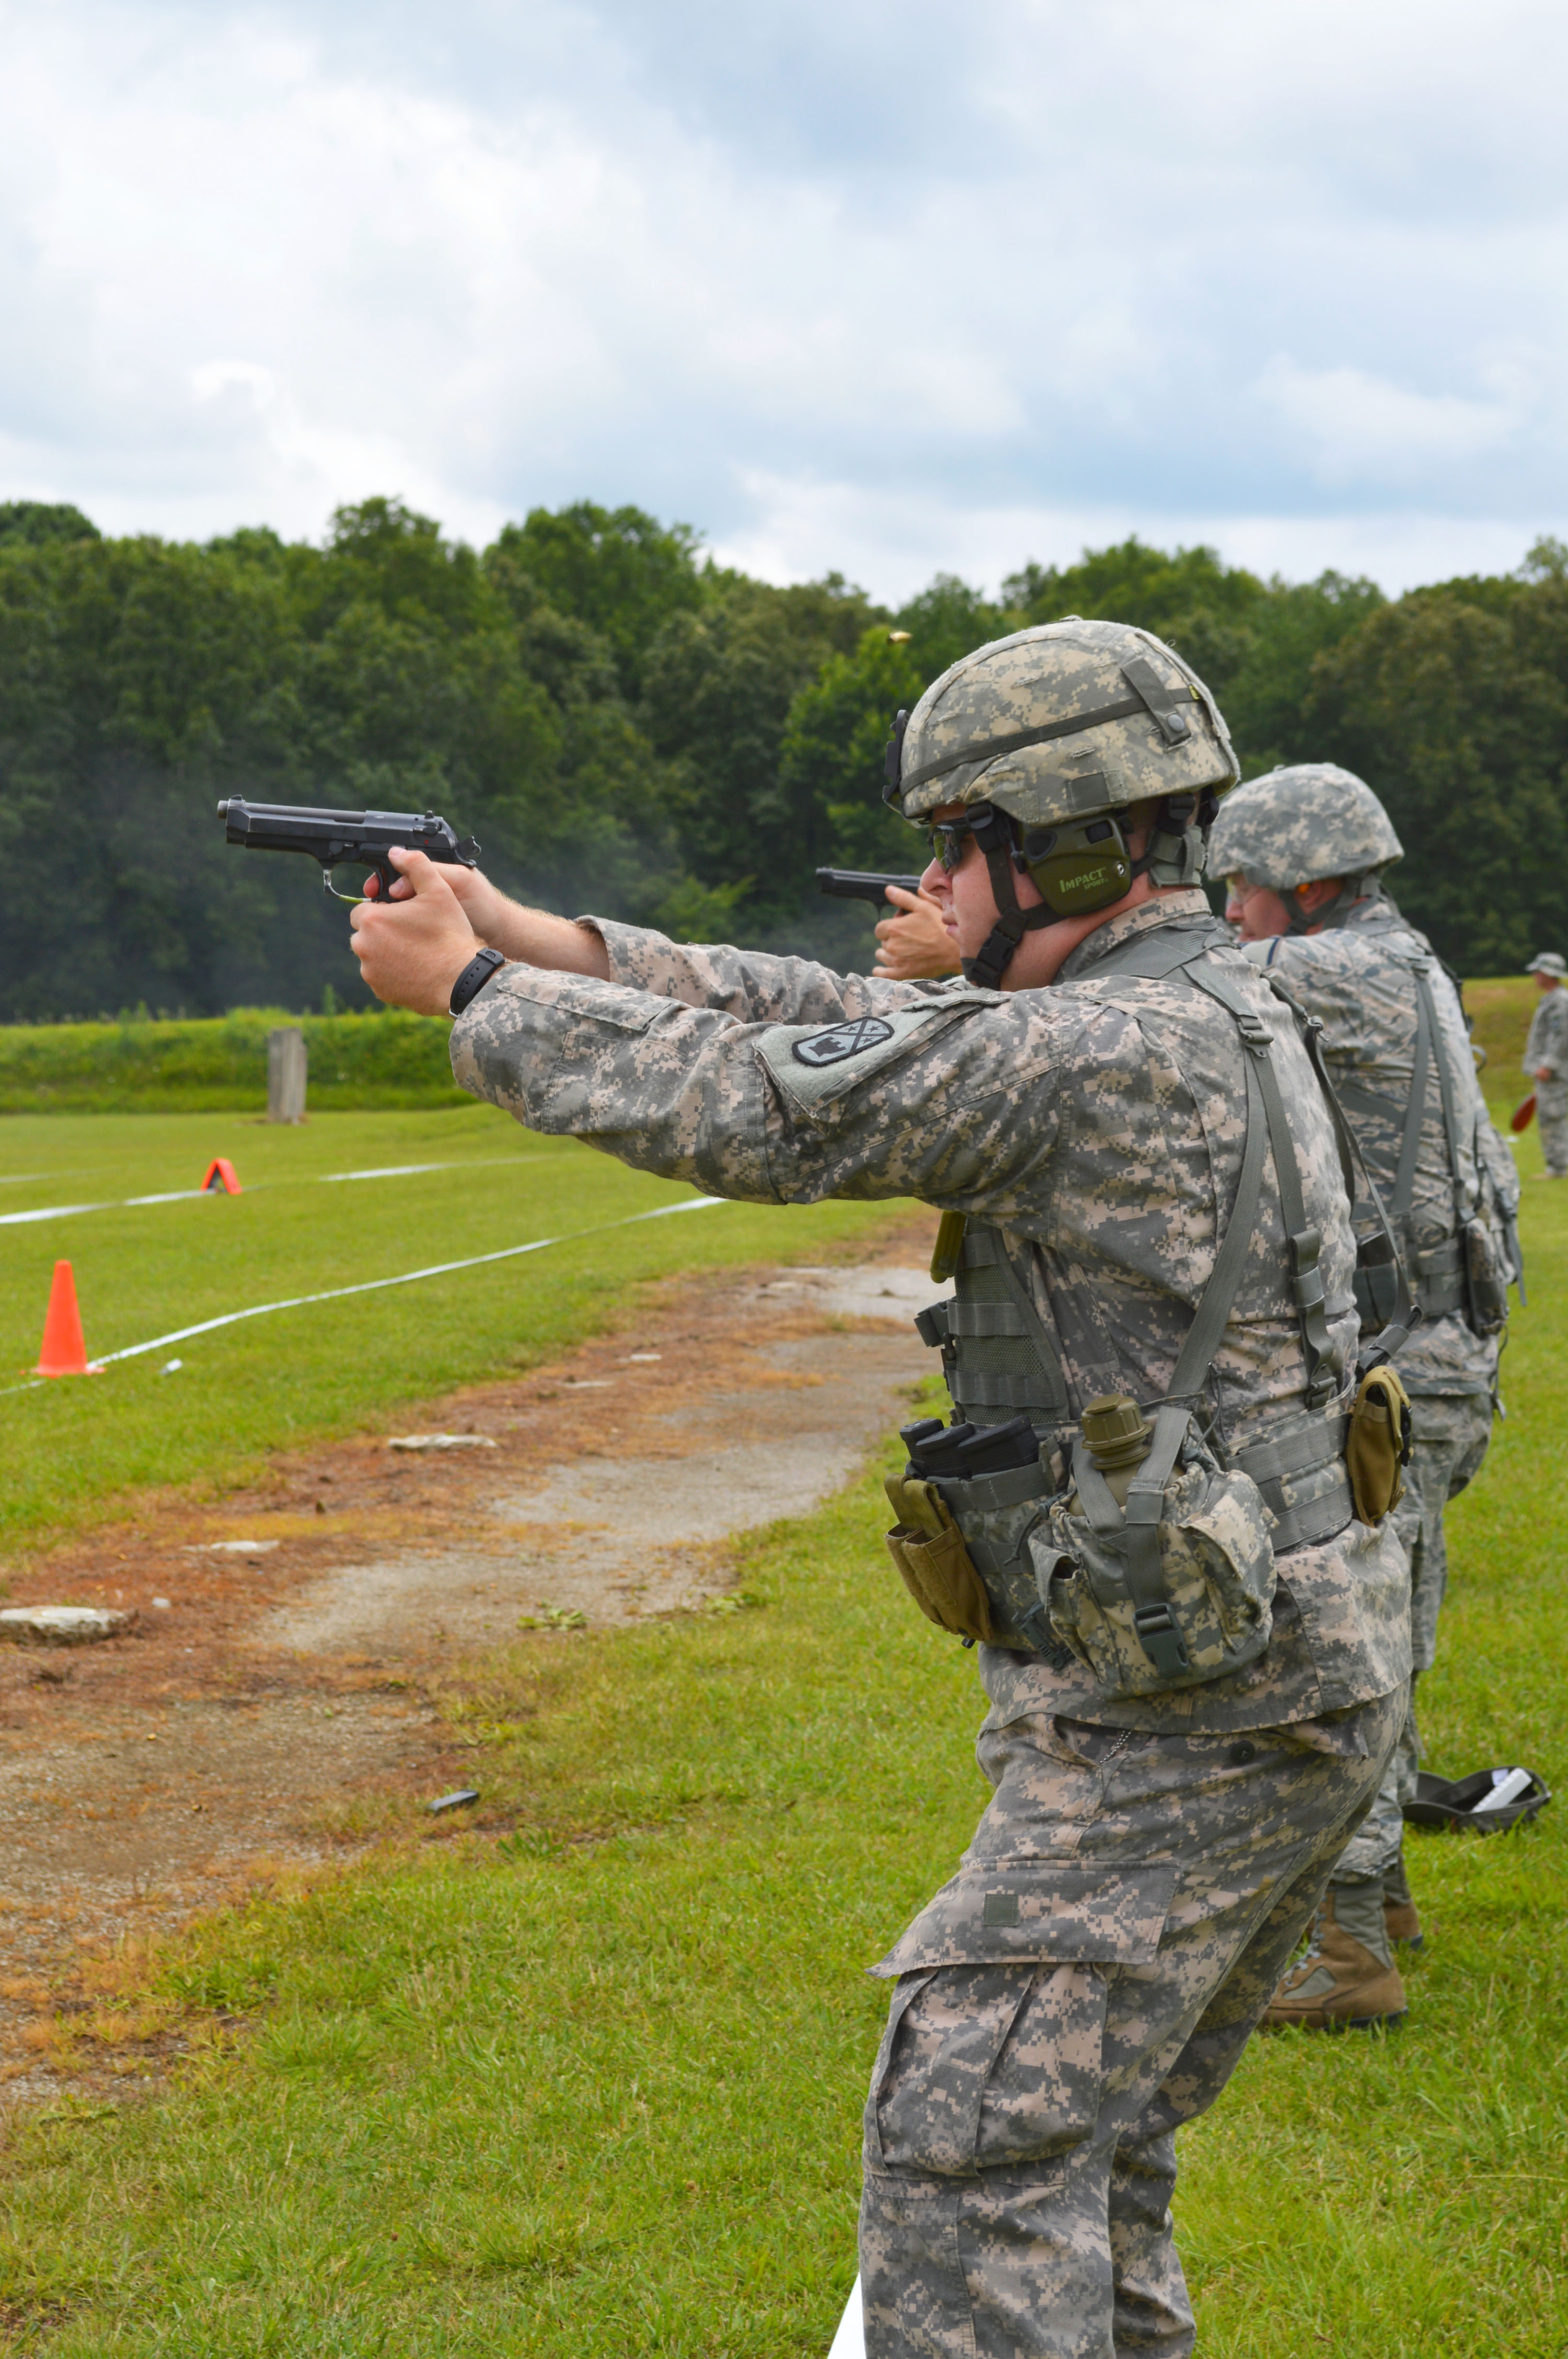 Tennessee Army National Guard Sgt David Caldwell Fires His Pistol At Targets Down Range During 8964